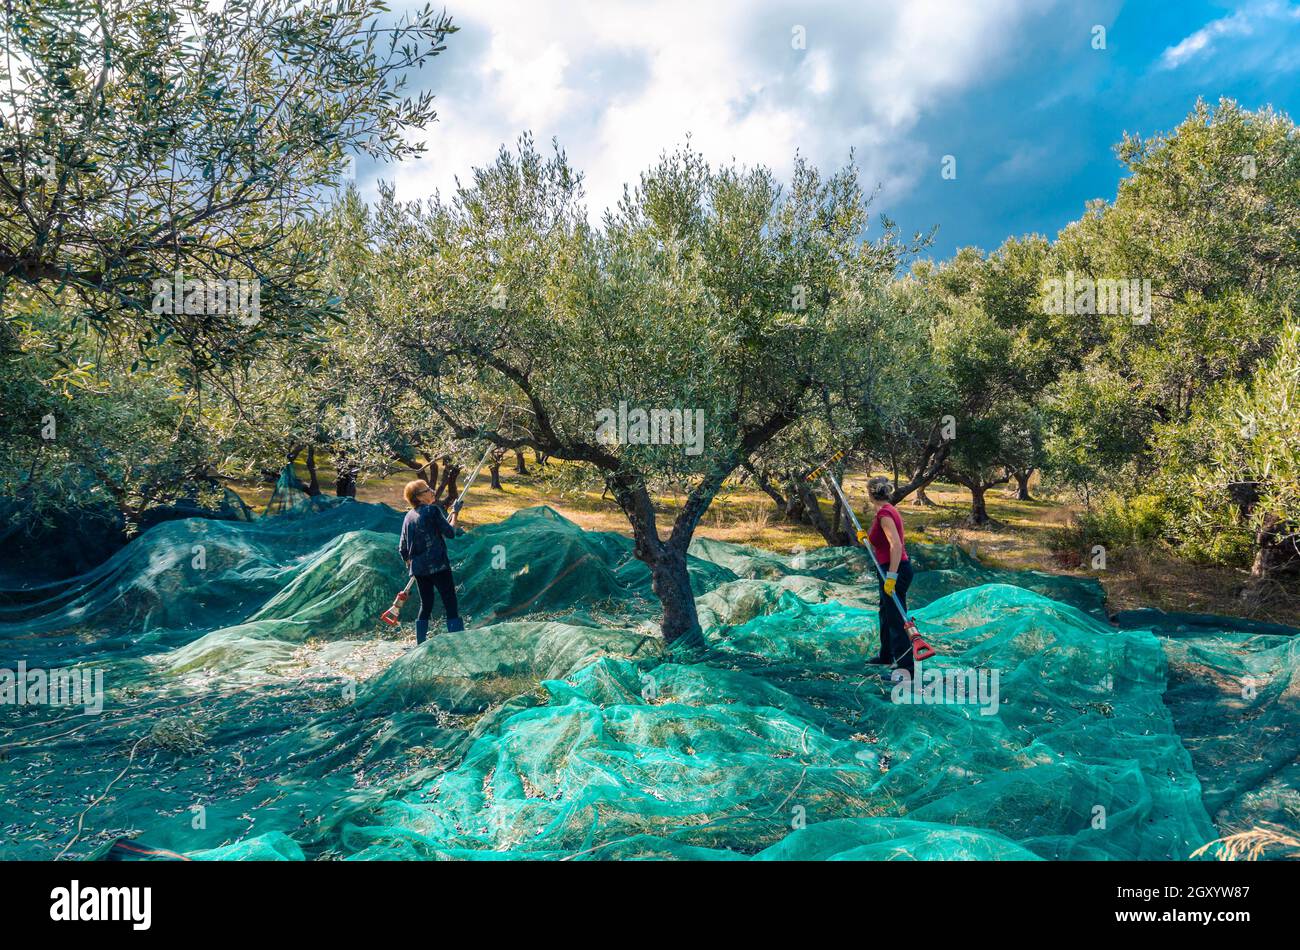 Crete Greece, Fresh olives harvesting from women agriculturalists in an olive field in Crete. Stock Photo